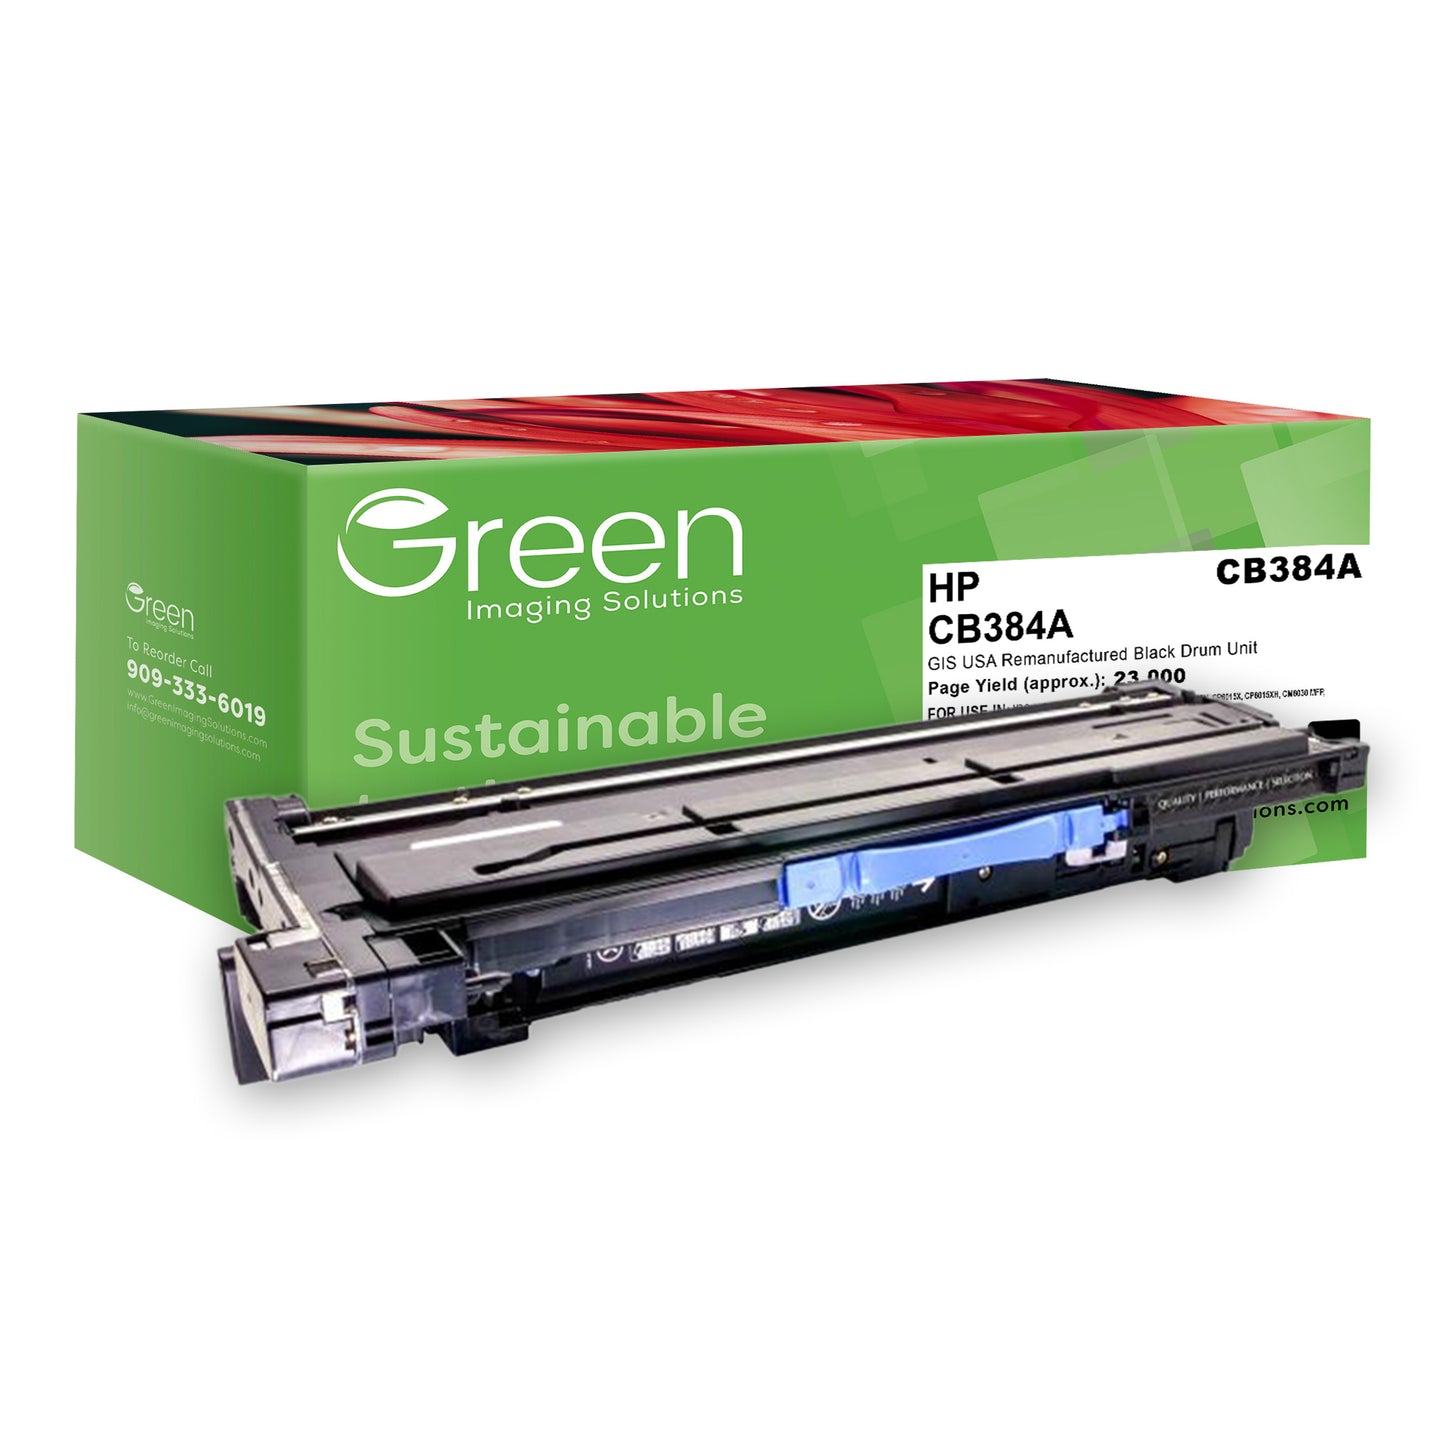 Green Imaging Solutions USA Remanufactured Black Drum Unit for HP 824A (CB384A)